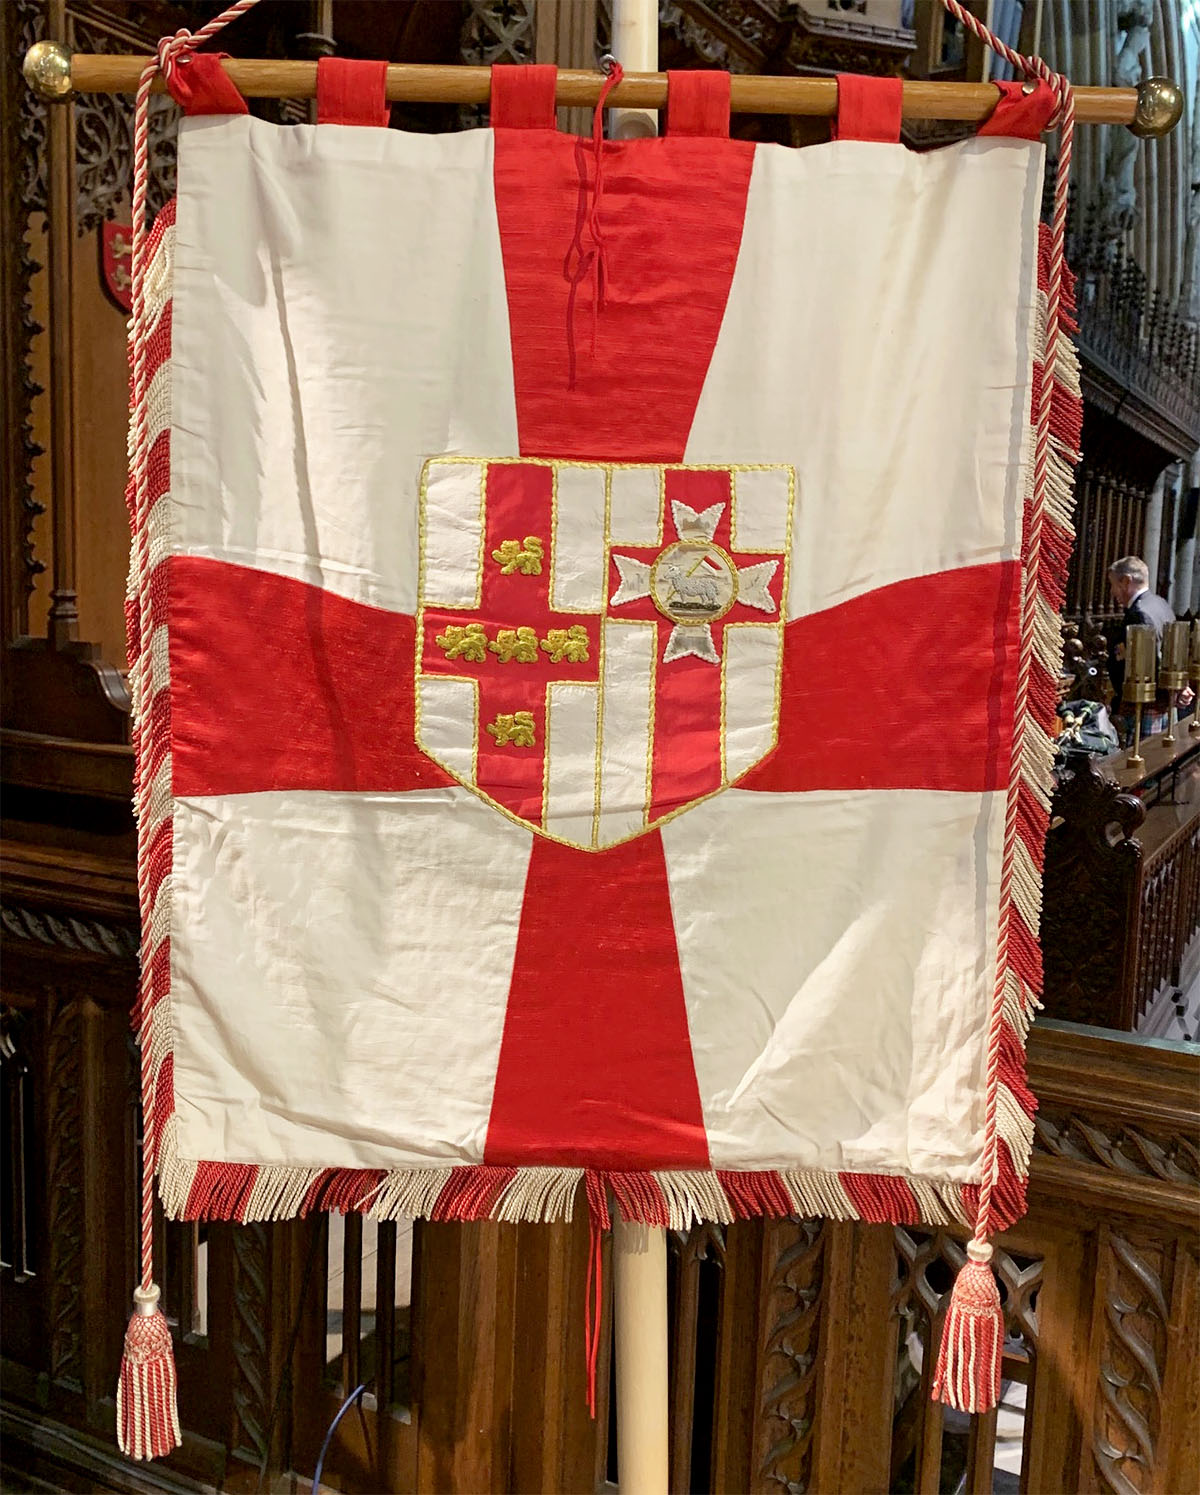 The Provincial Priory of North and East Yorkshire